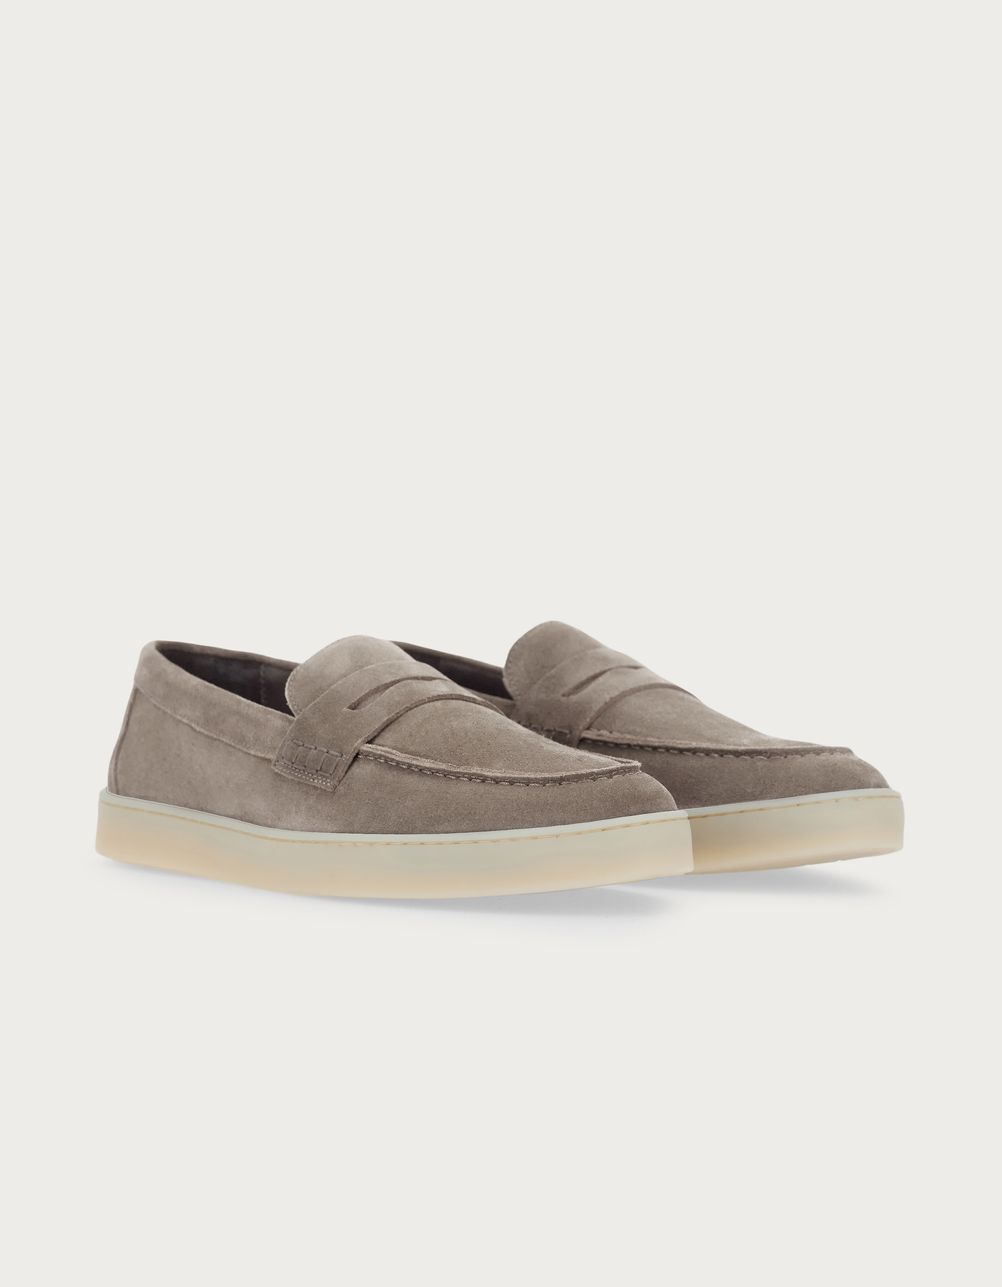 Sand suede loafers